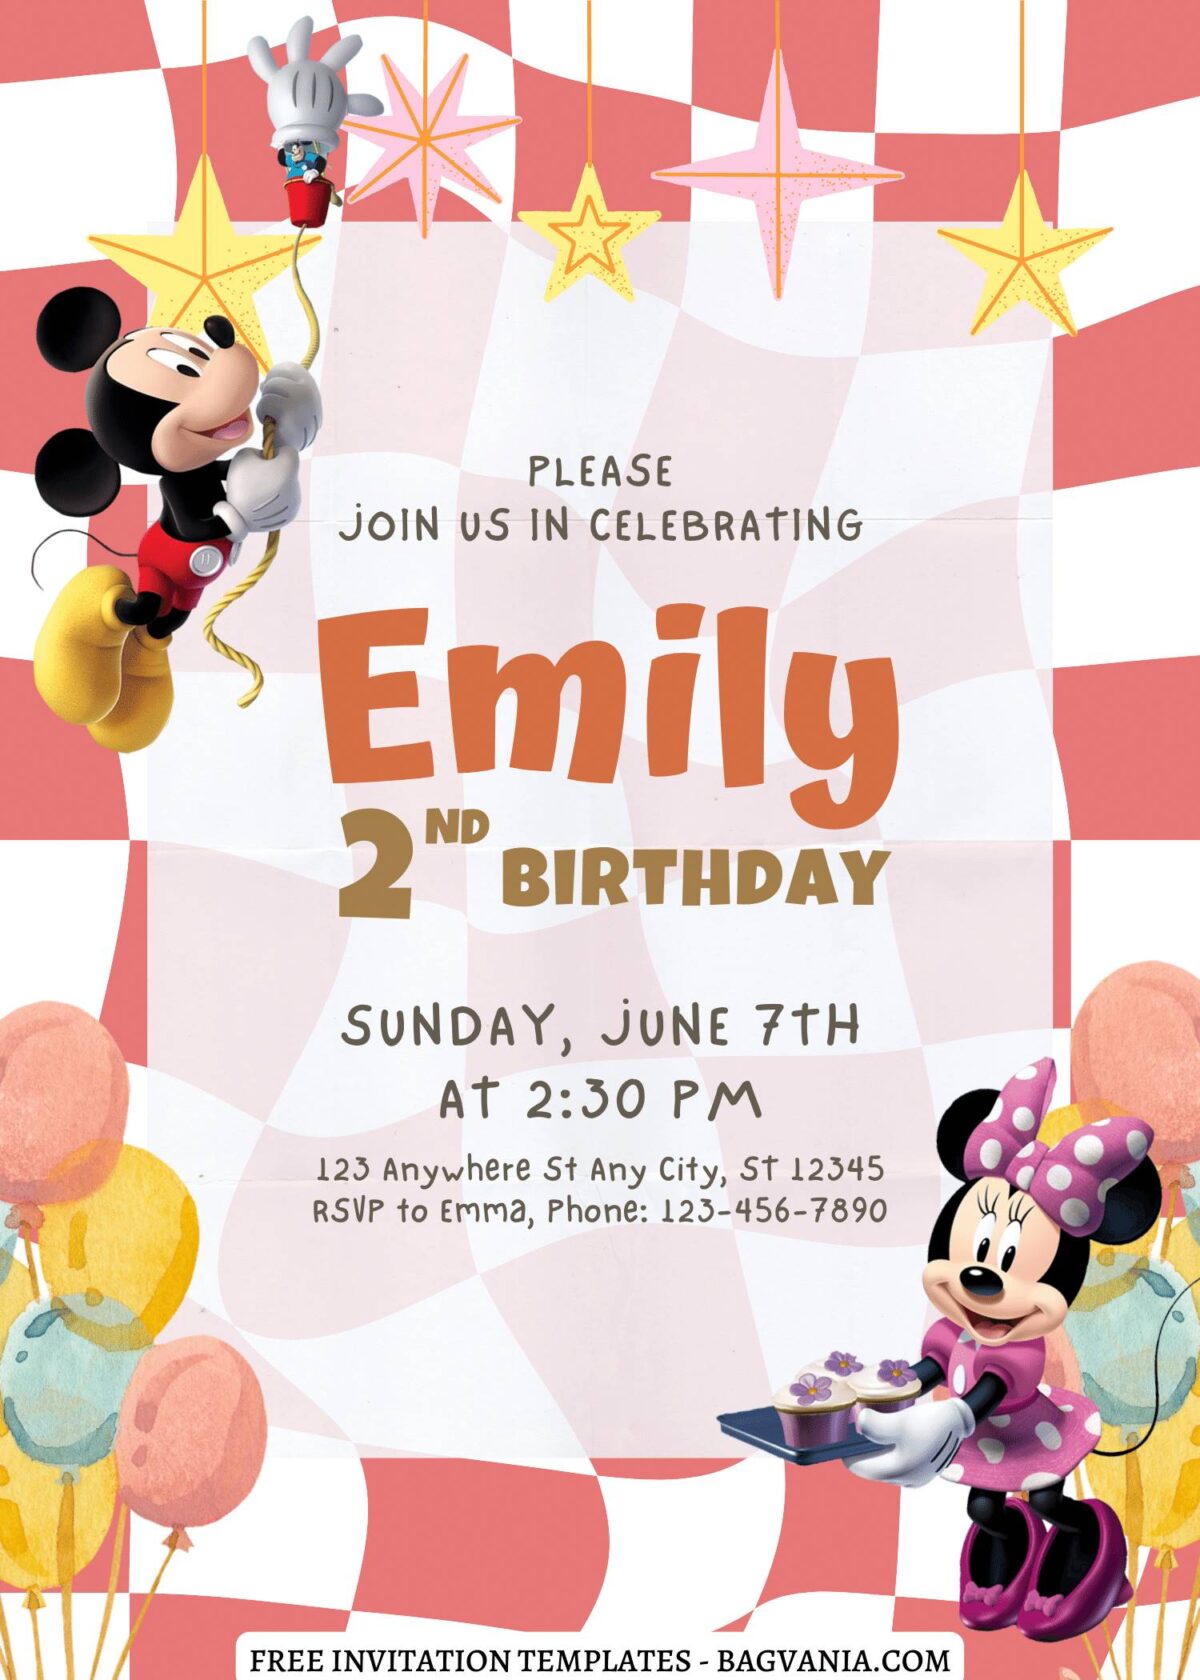 10+ Bright & Cheery Mickey Mouse Clubhouse Canva Birthday Invitation with adorable Minnie's serving yummy cupcakes